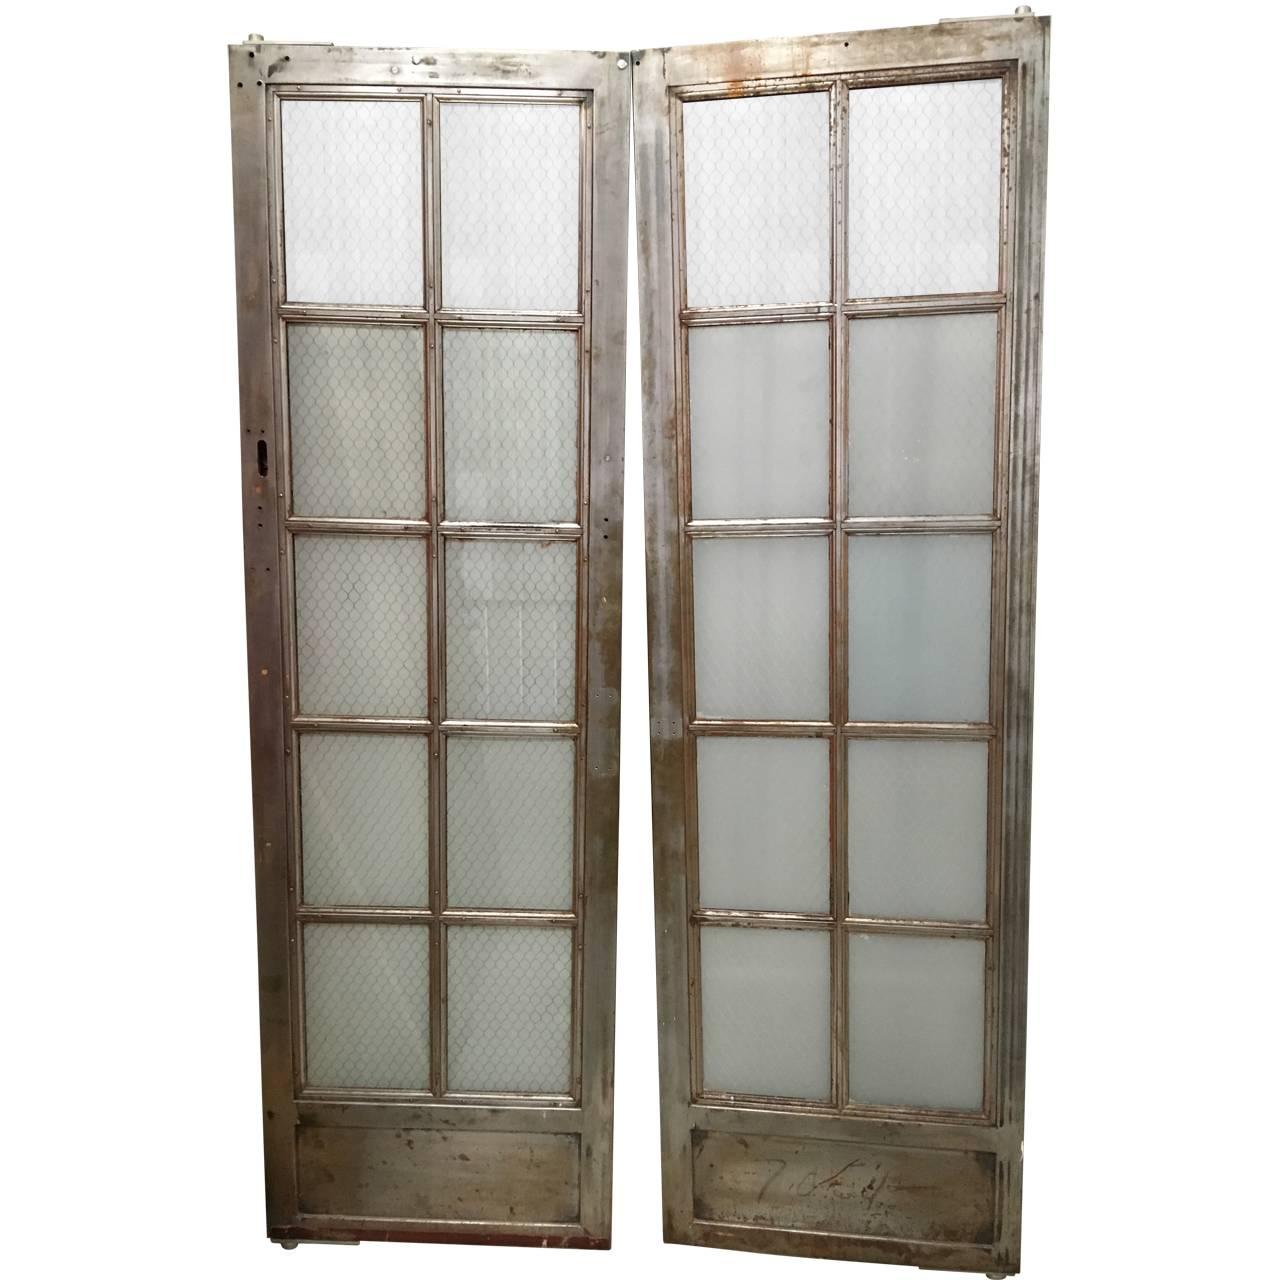 1 single elevator door is left or room divider or dressing screen
Glass panel size, inside, H 13 inches x W 9.5 inches